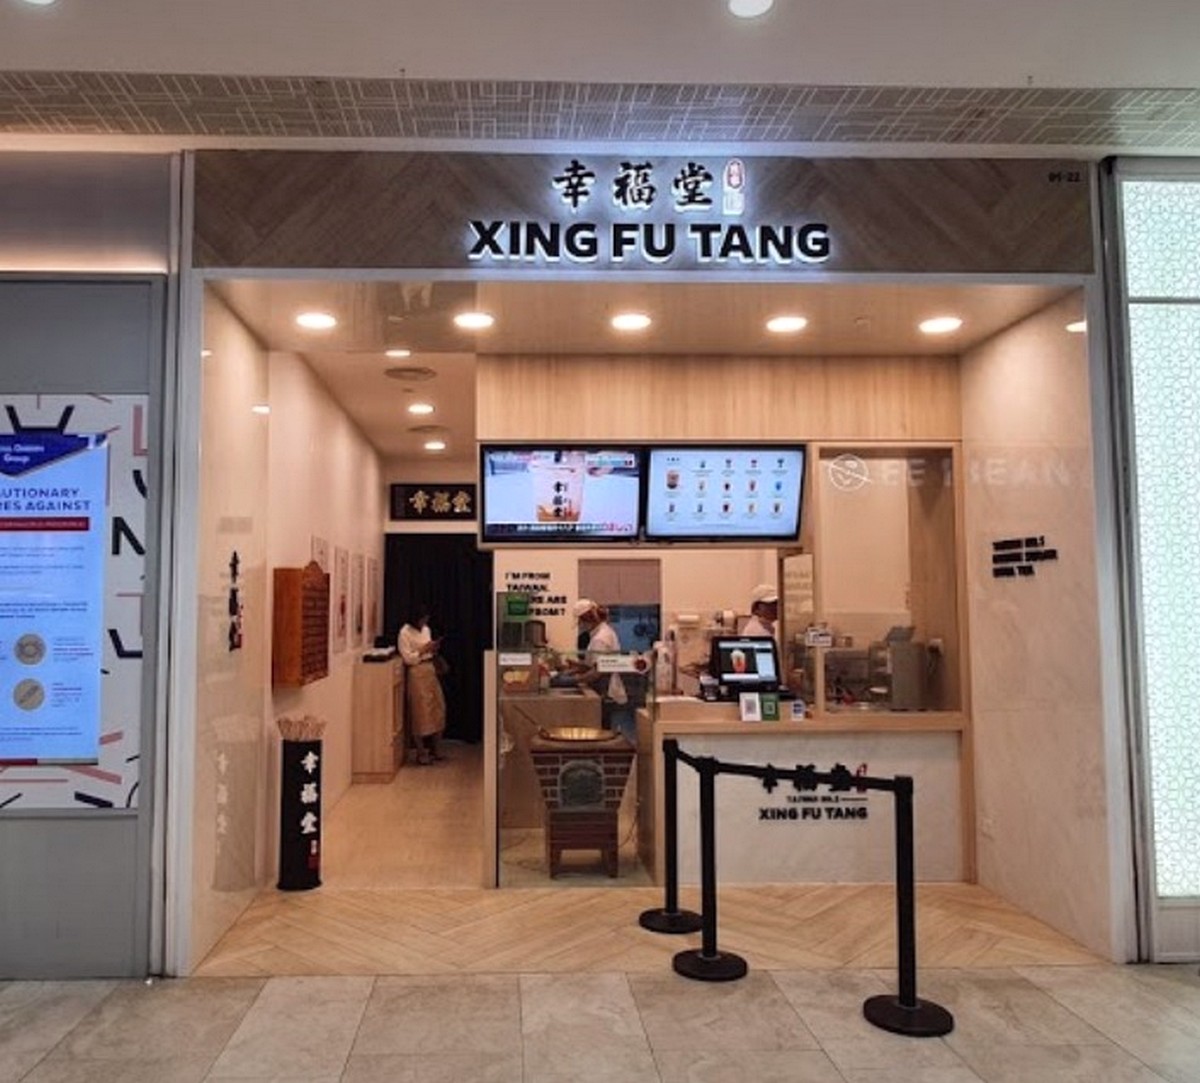 xing-fu-tang-singapore-outlets-Google-Search 1-30 Jun 2021: Xing Fu Tang Happy 2nd Birthday 1-For-1 Promo on Thailand Series Milk Tea for Delivery & Takeaway at All Outlets in Singapore